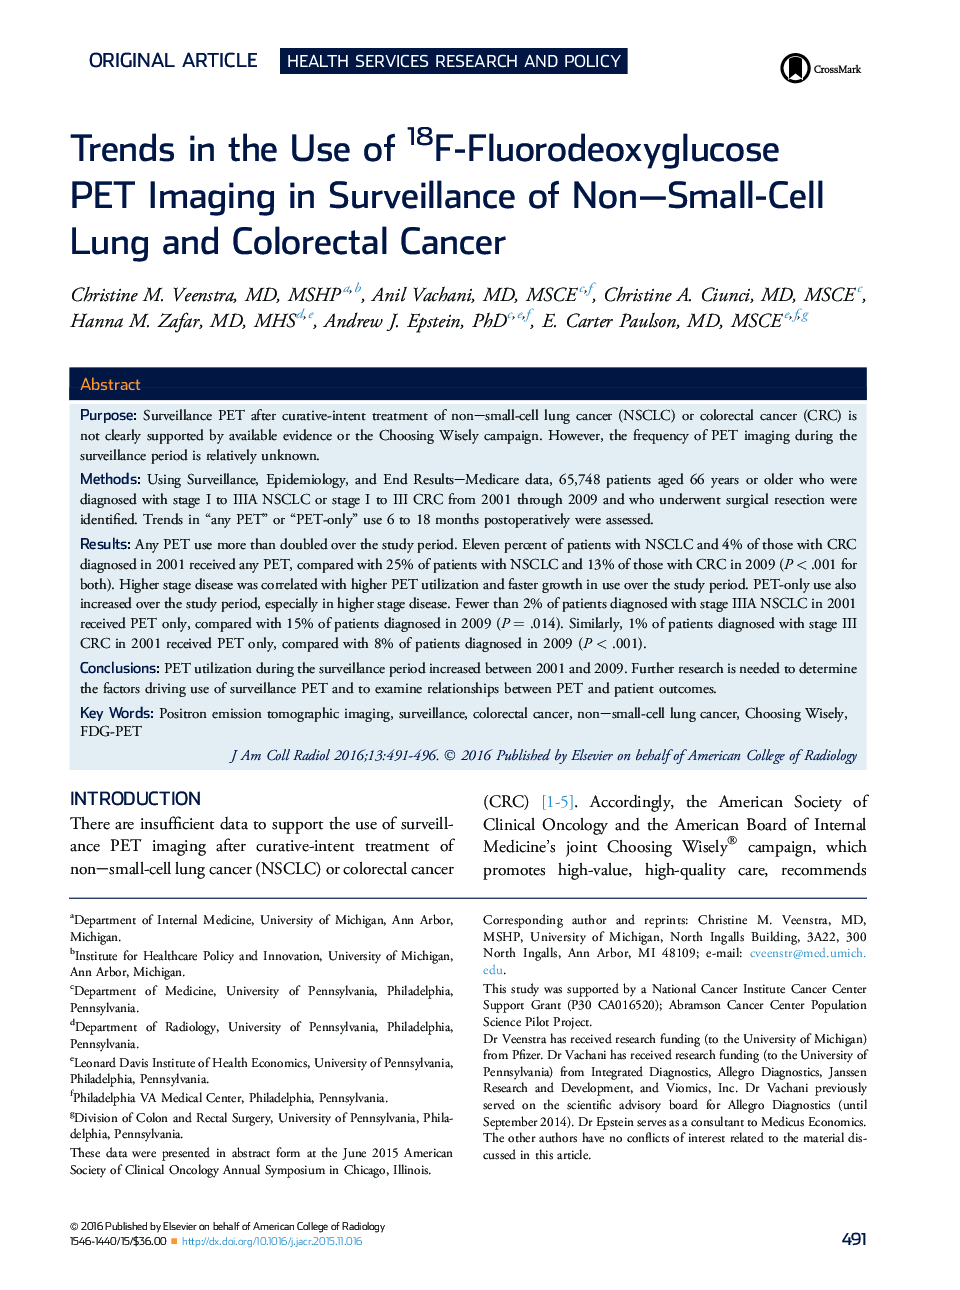 Trends in the Use of 18F-Fluorodeoxyglucose PETÂ Imaging in Surveillance of Non-Small-Cell Lung and Colorectal Cancer